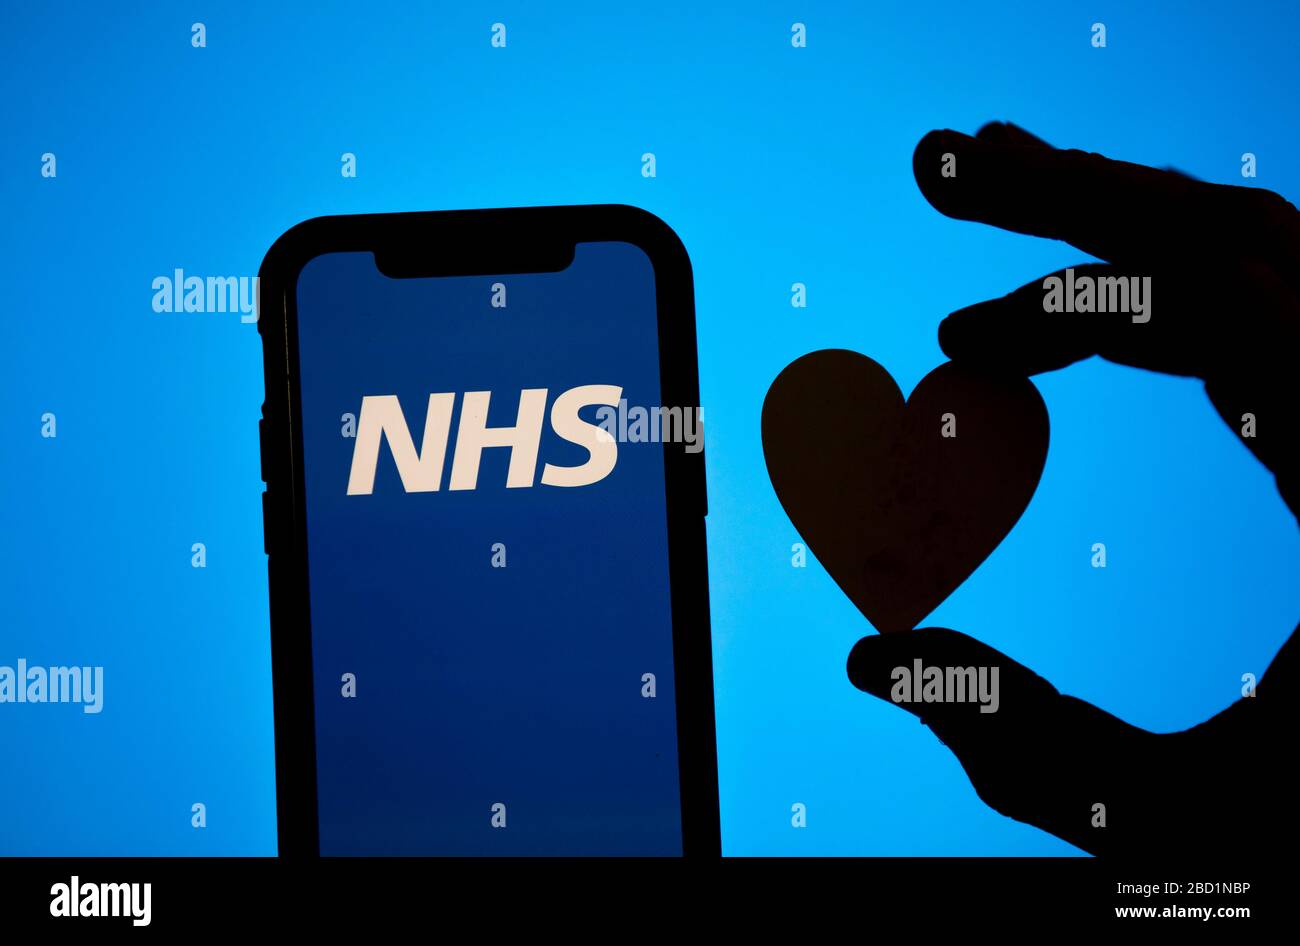 LONDON, UK - April 6th 2020: National health service logo with heart silhouette Stock Photo